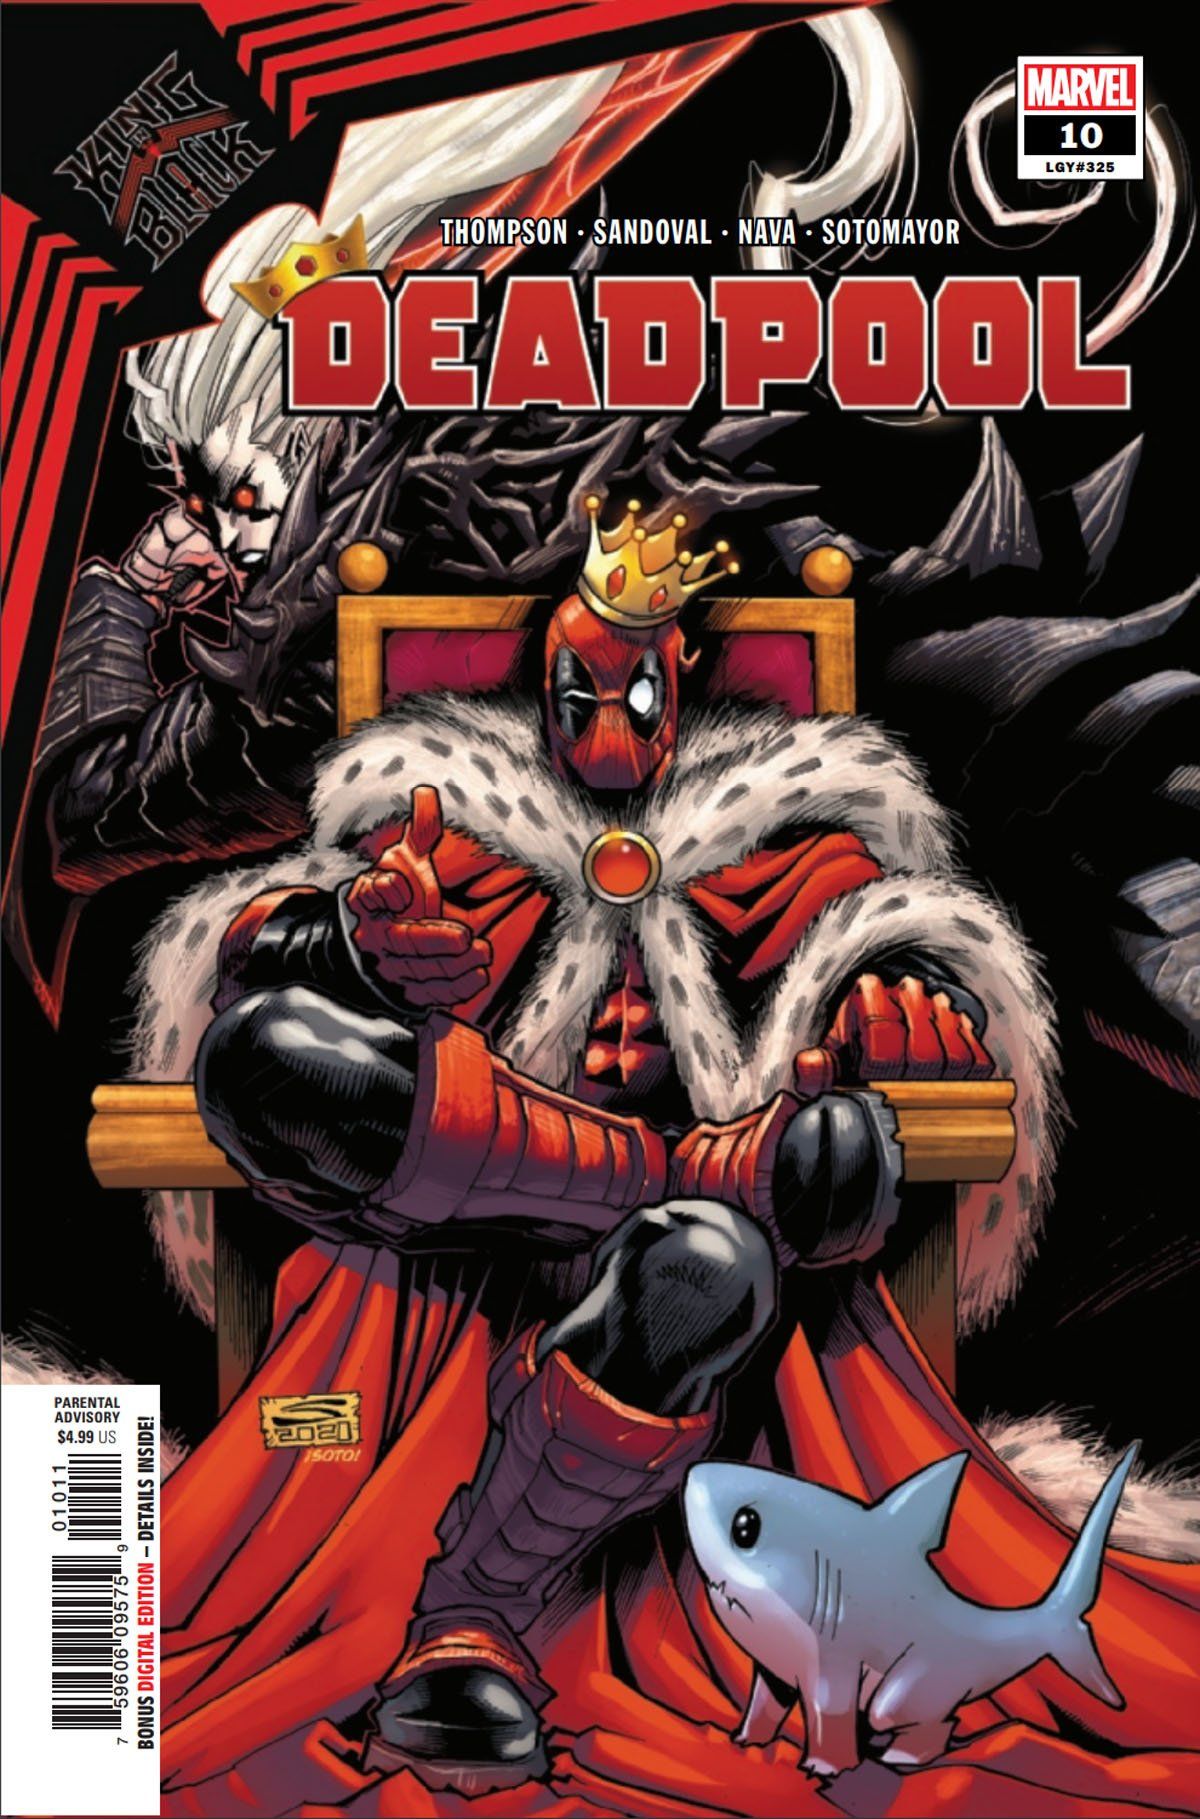 King in Black is About To Face Deadpool’s Army